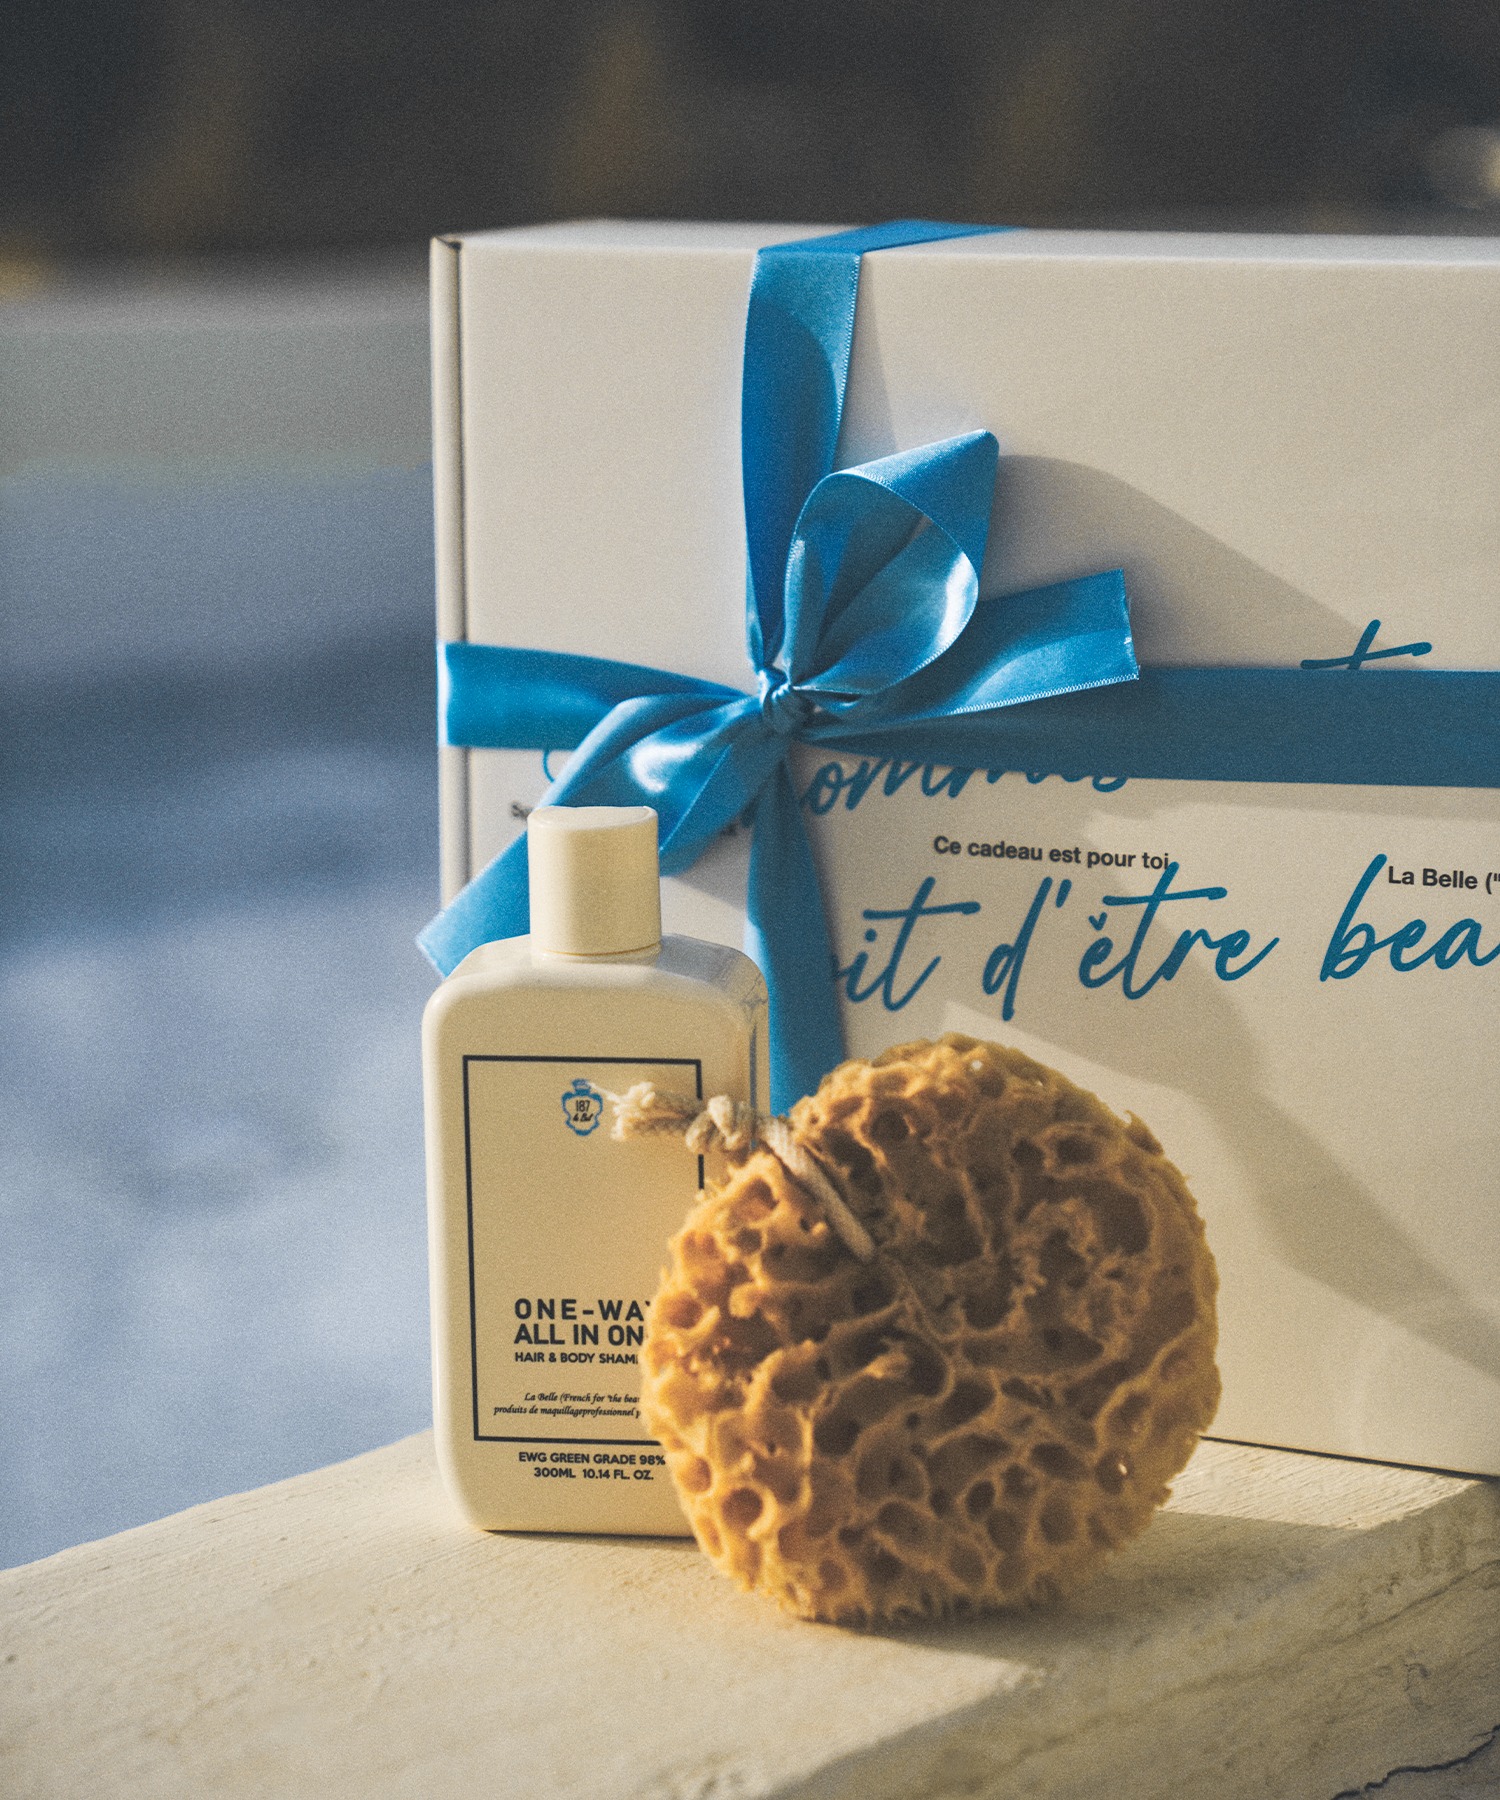 PERFECT SHOWER SET (ALL IN ONE HAIR&amp;BODY &amp; SEA SPONGE)